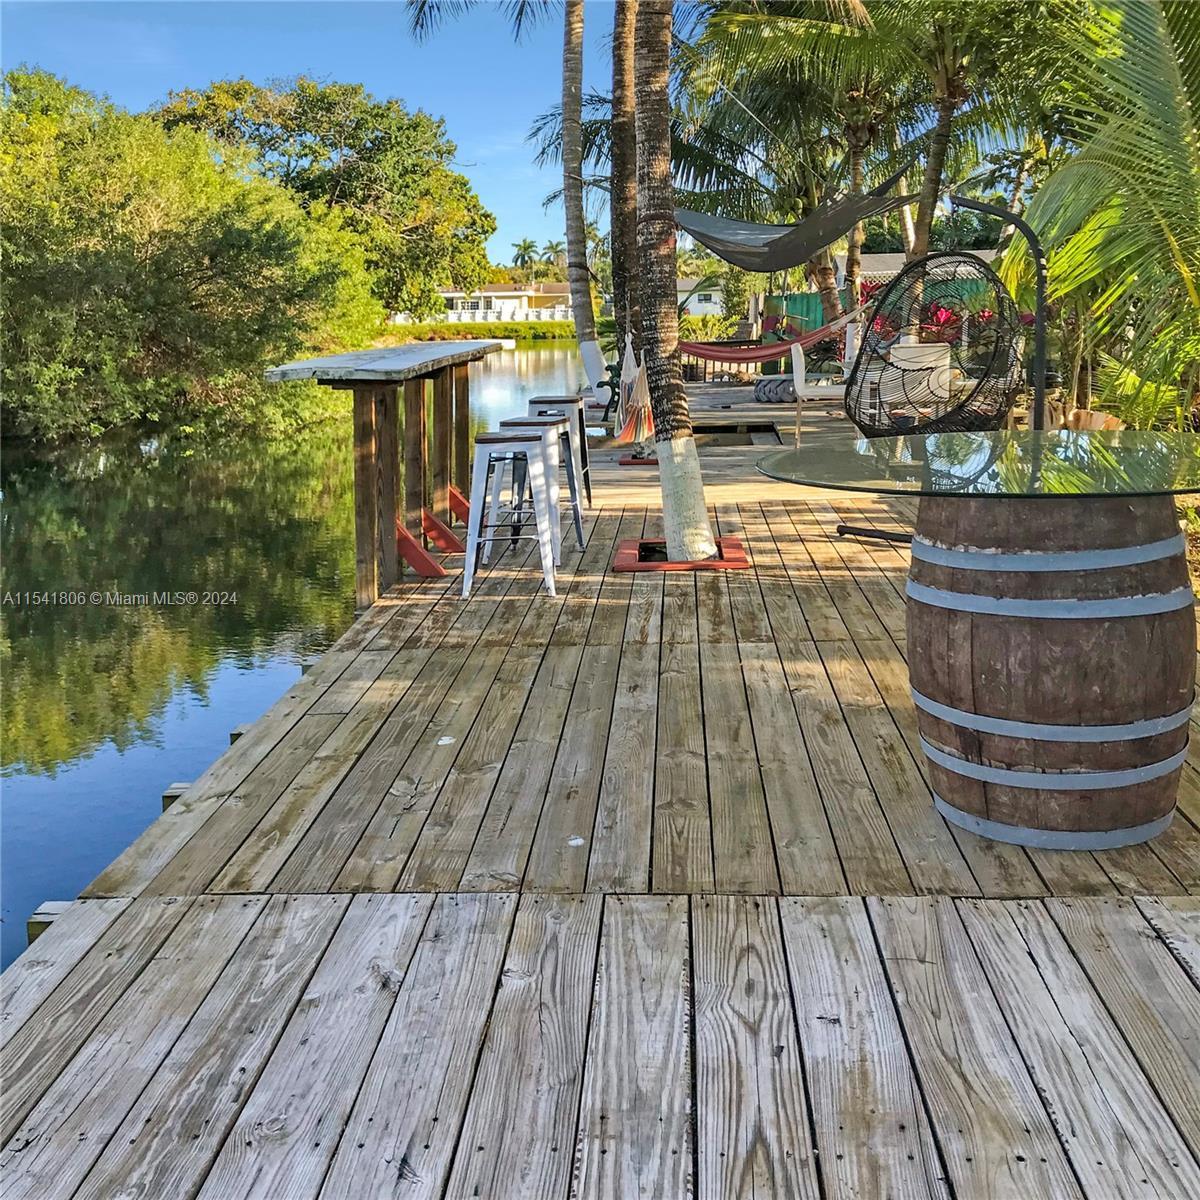 Welcome to this beautiful canal front home in Palmetto Bay. This lovely property features updated ki